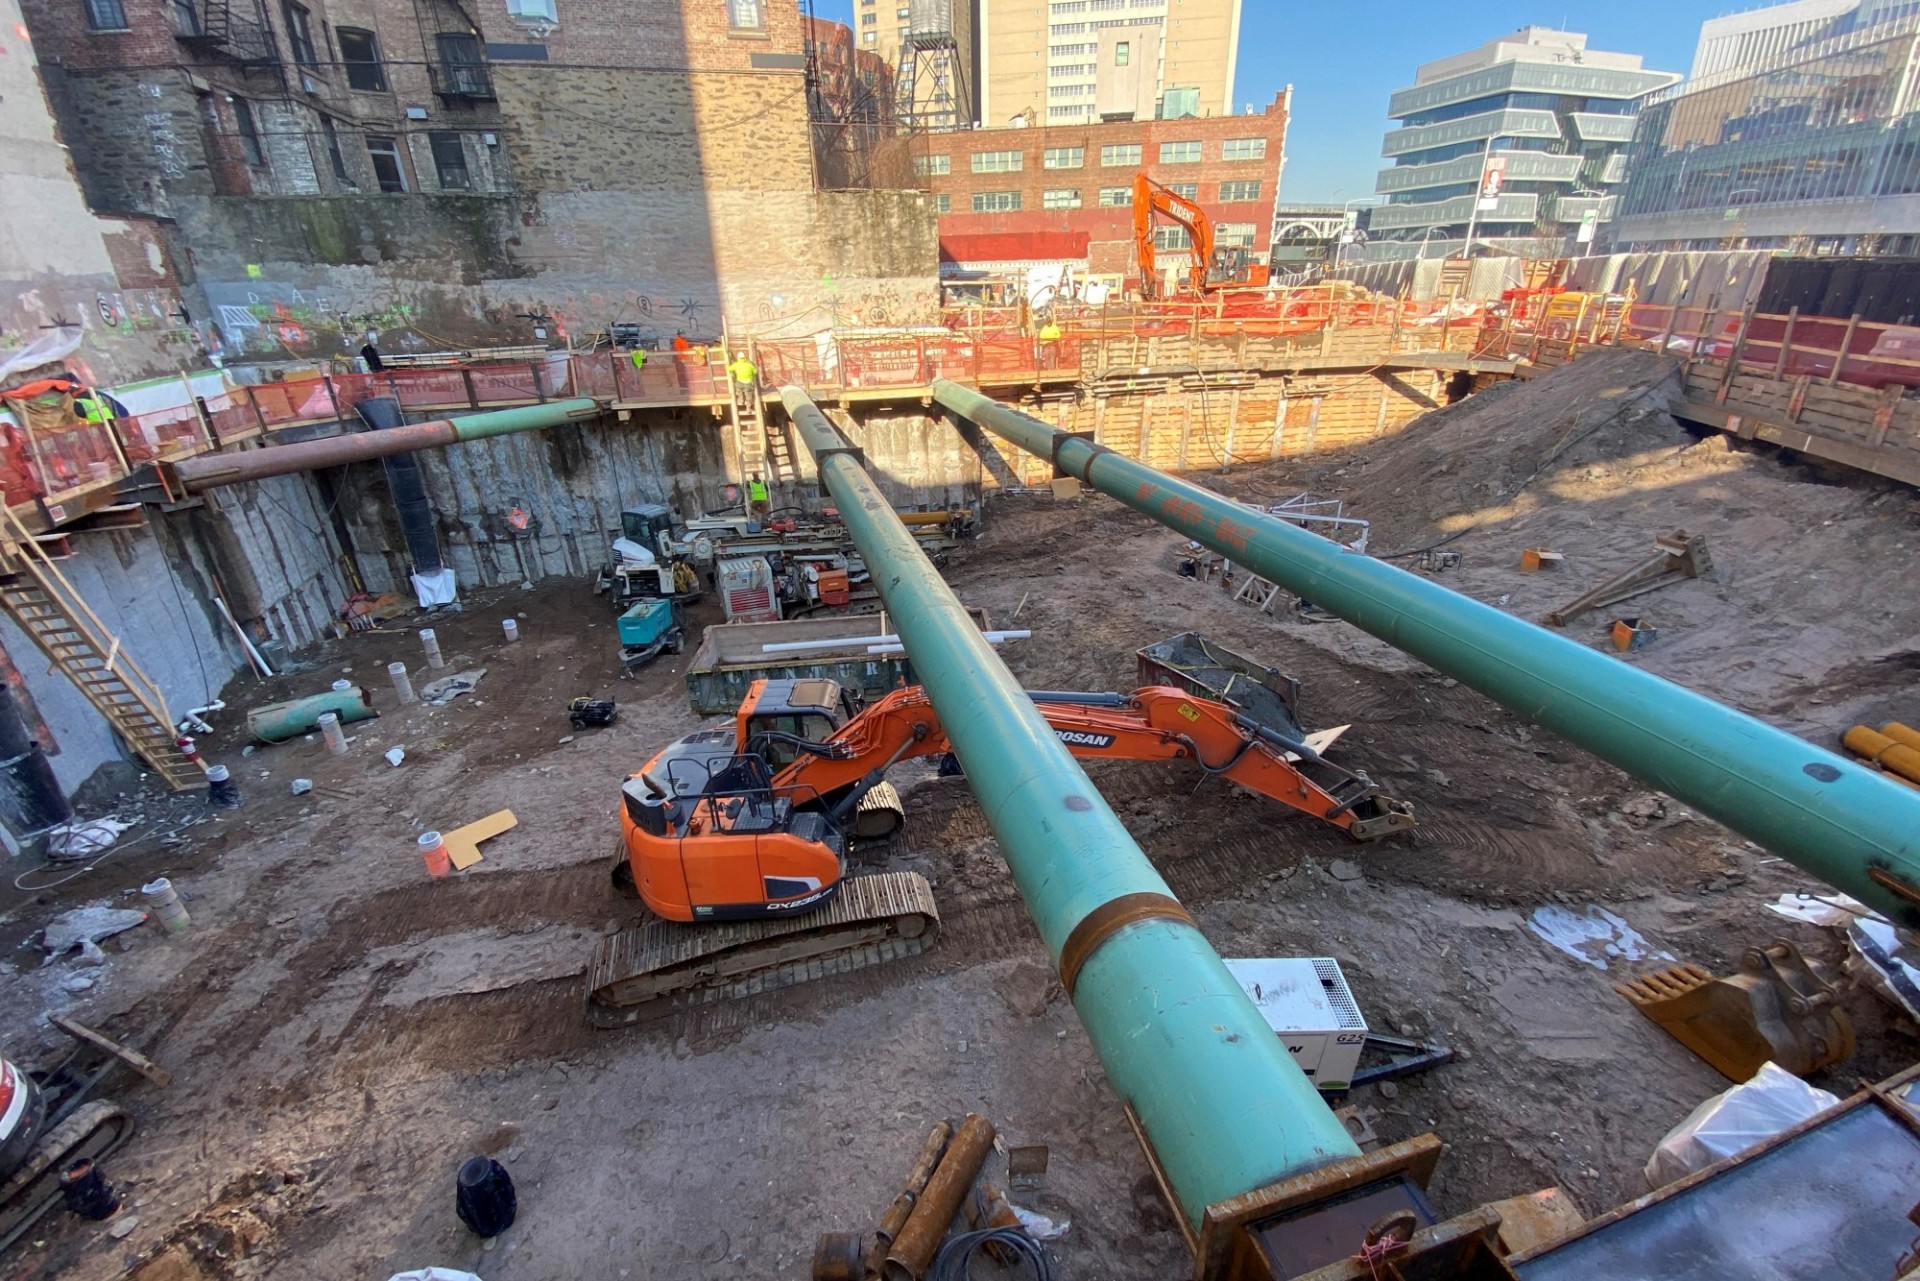 A view of the 600 W. 125th Street construction site with equipment and support pipes running across.